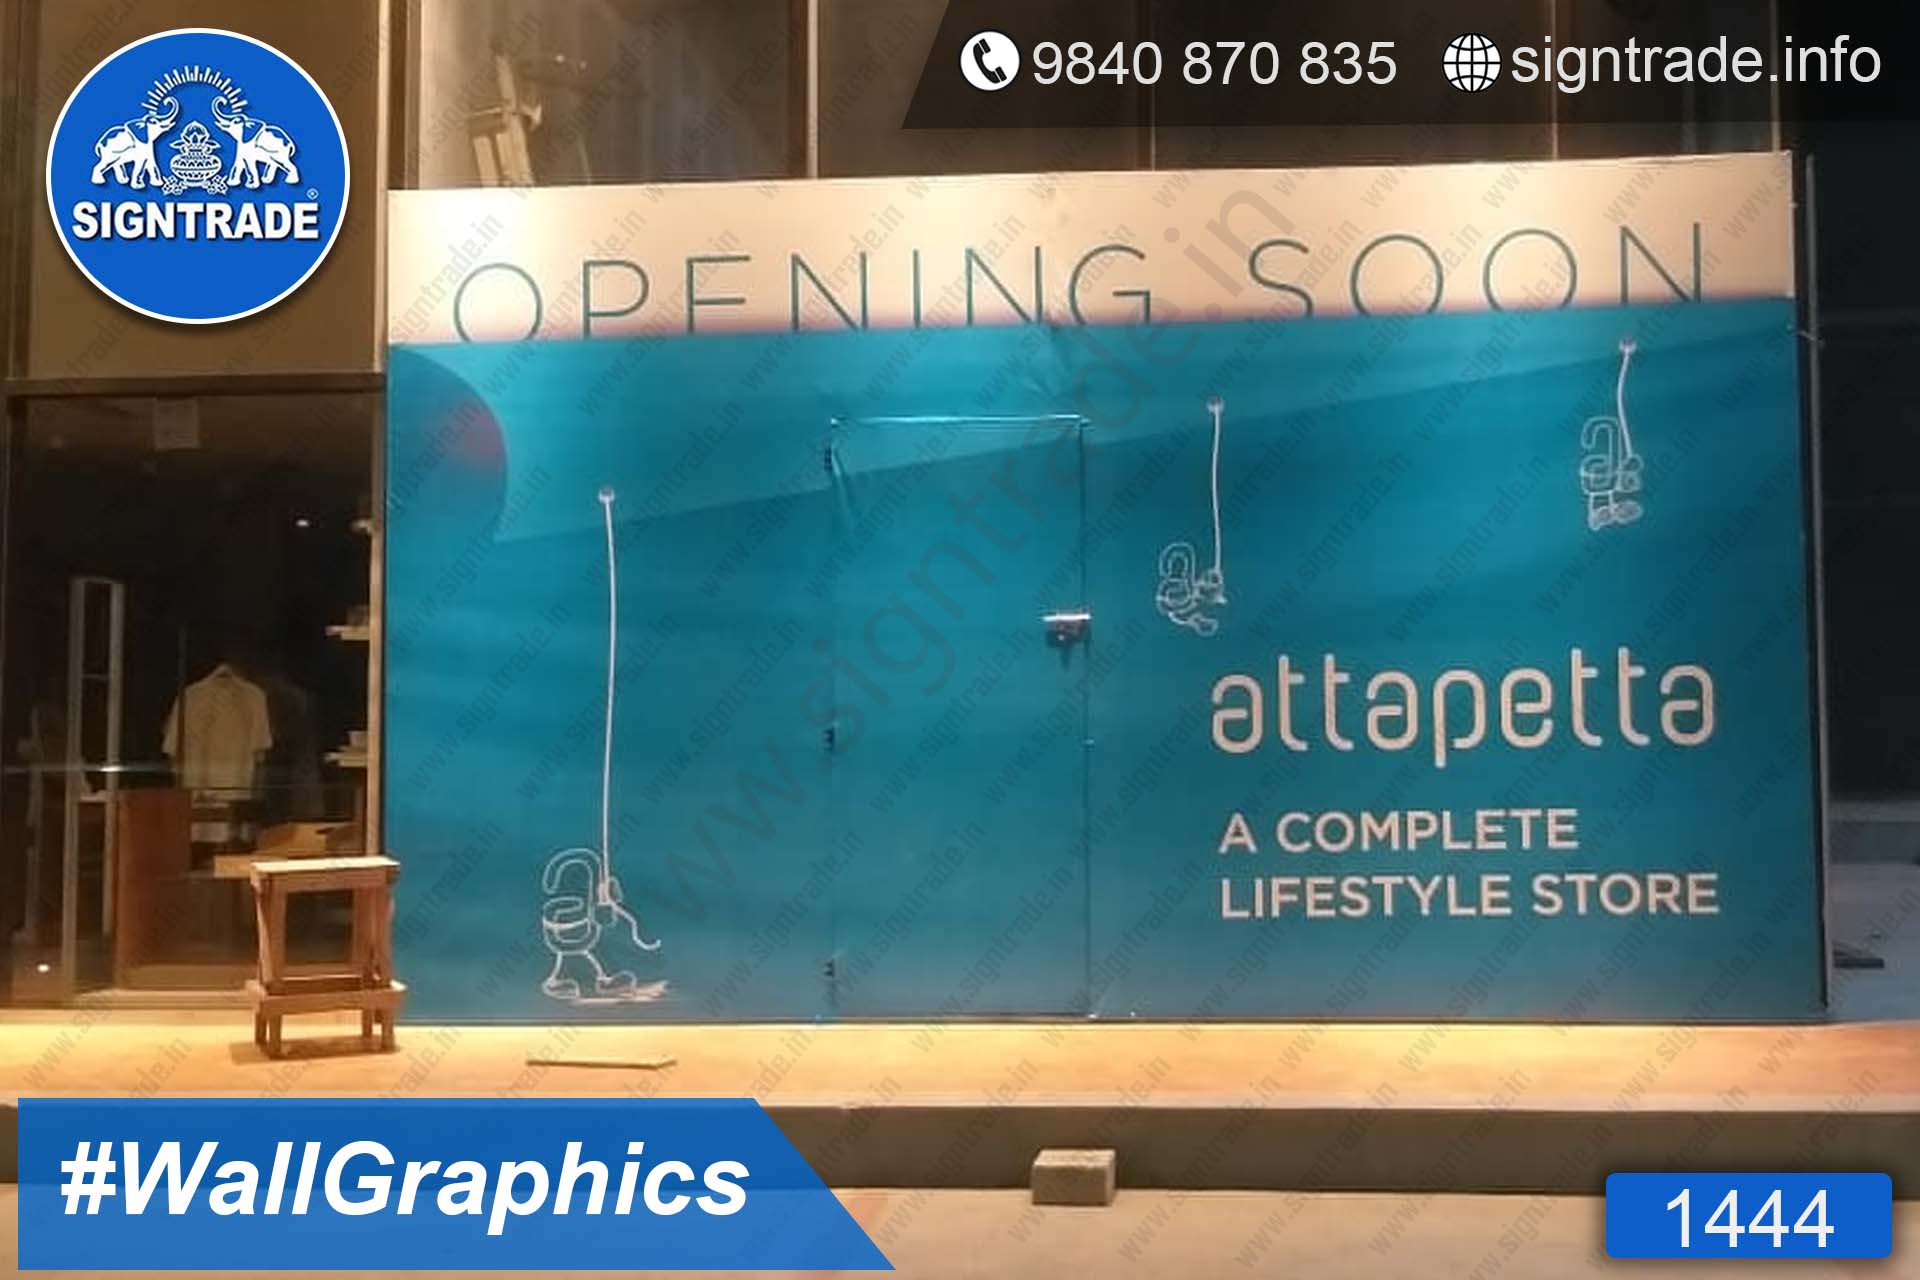 Attapetta - 1444, Vinyl Graphics, Wall Graphics, Wall Wrapping, wall stickers, wall Wraps, Wall Branding